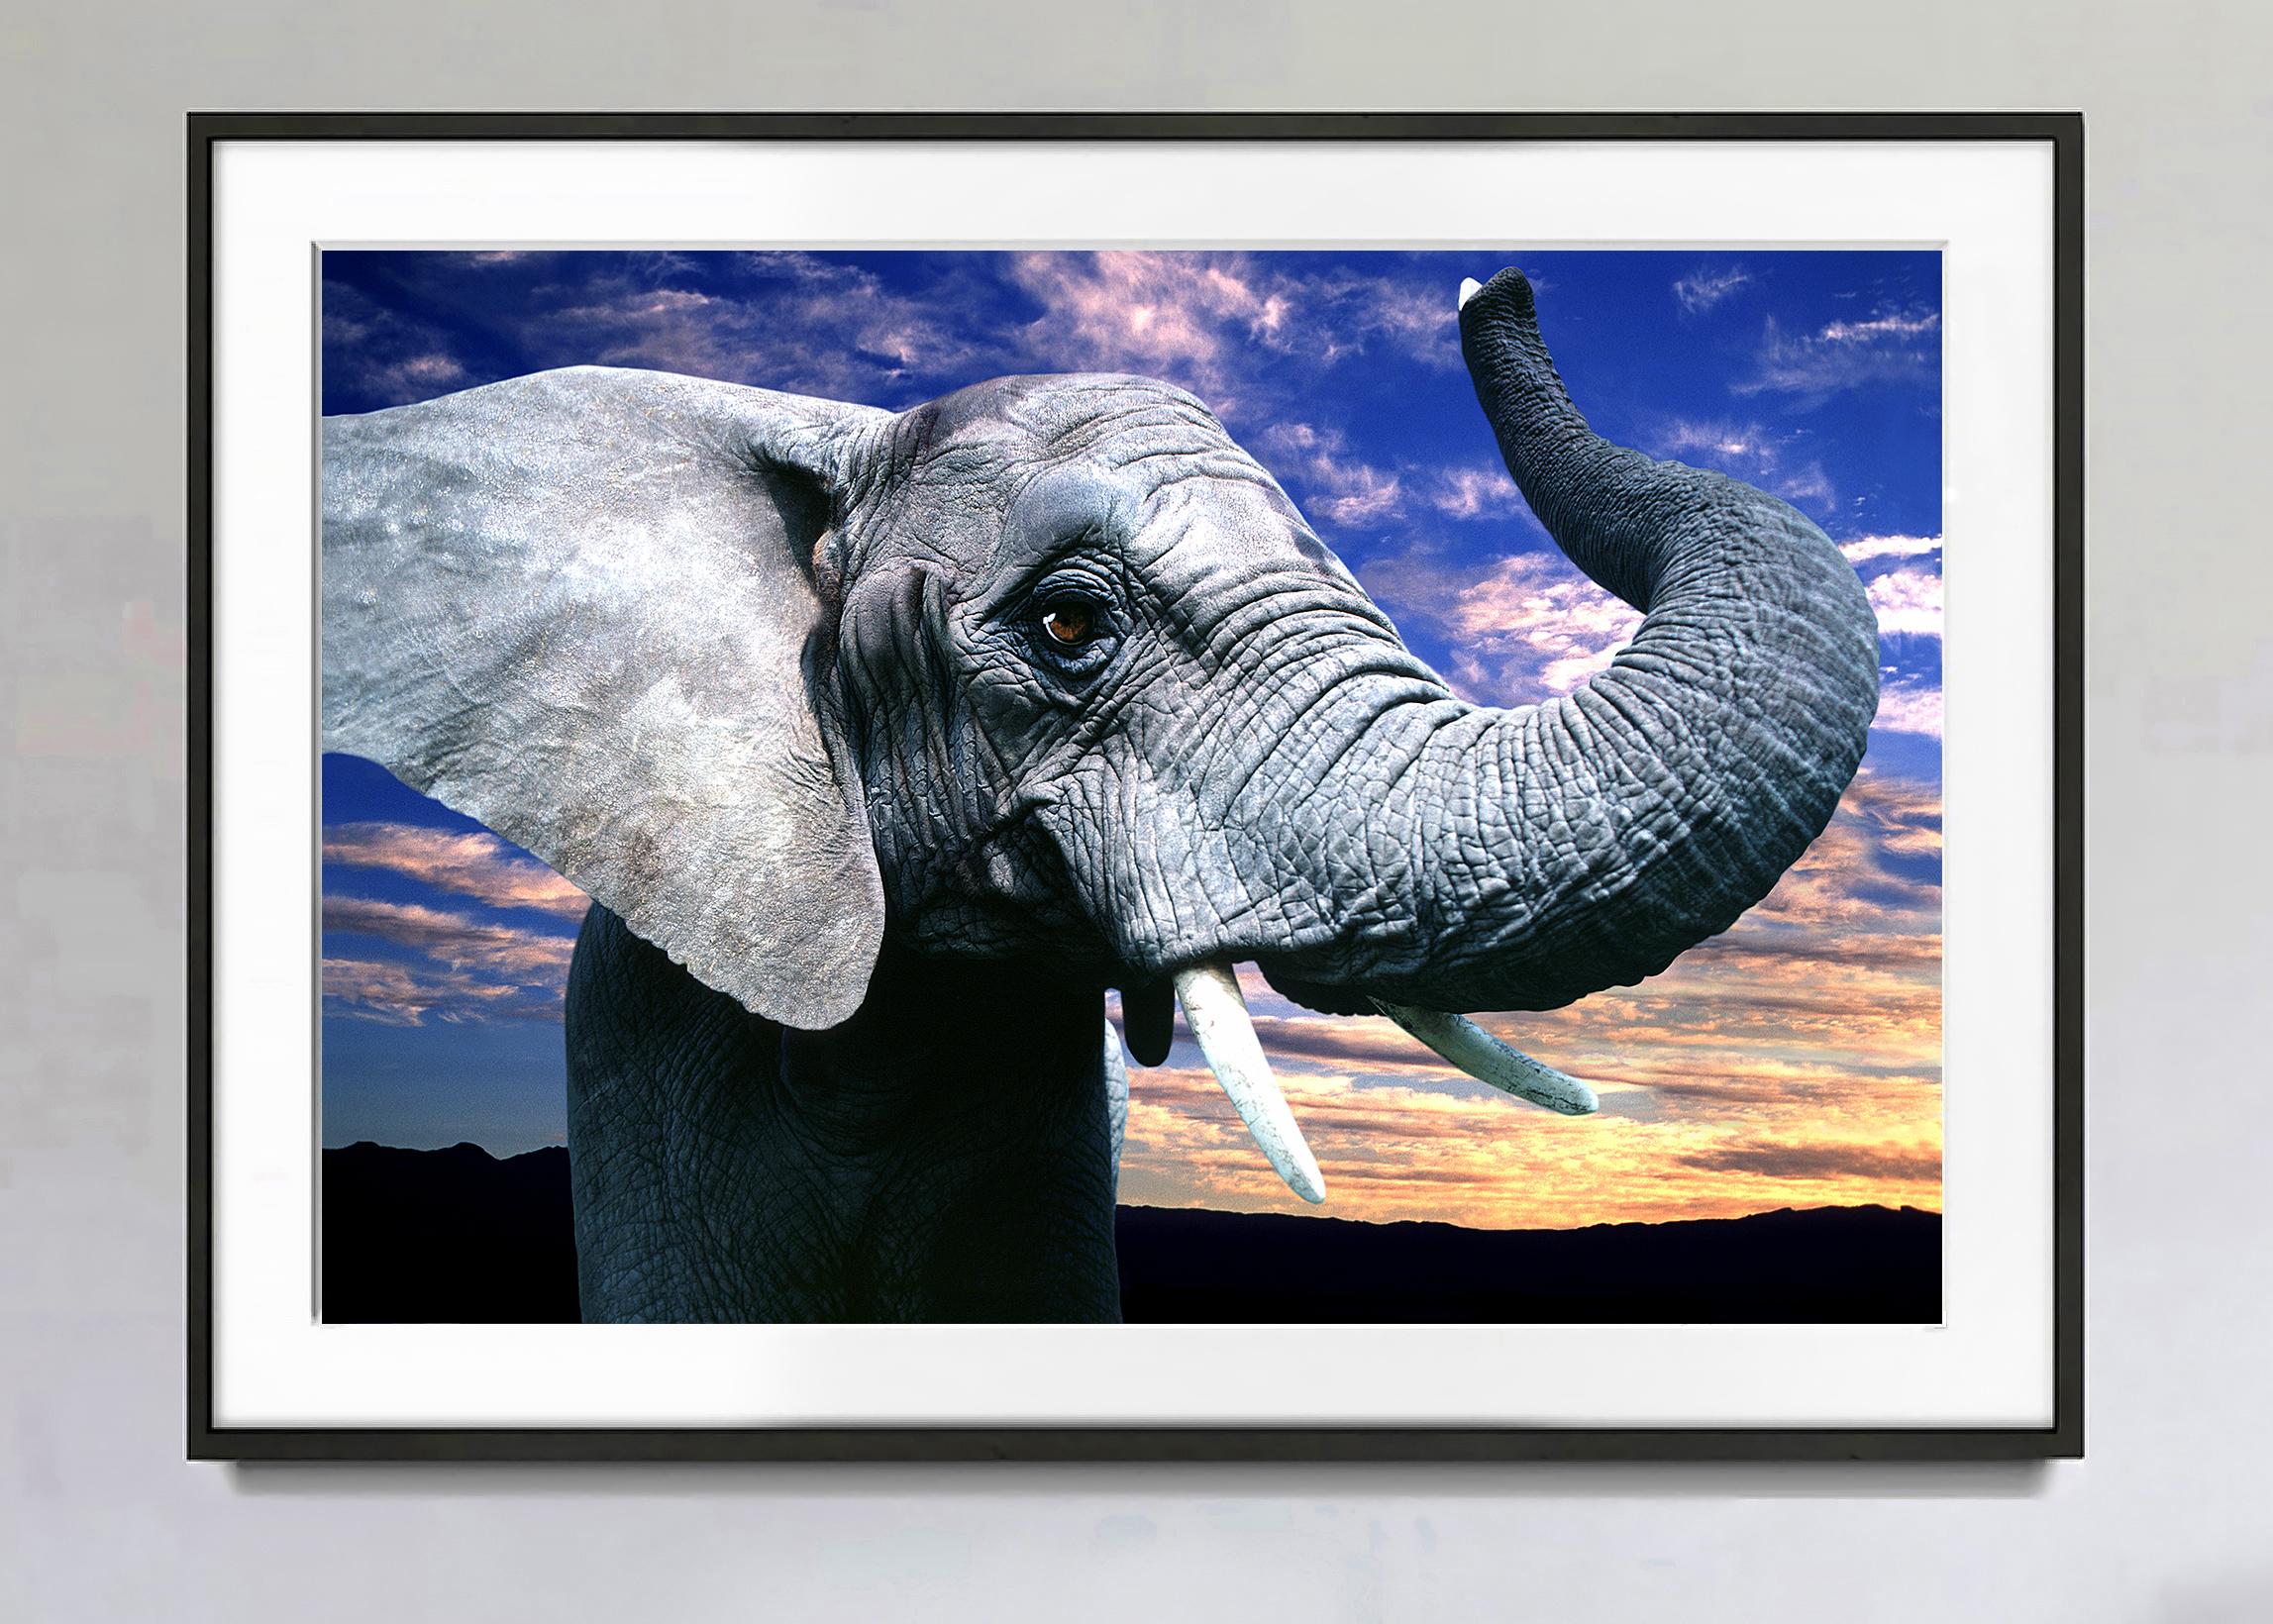 Elephant Close Up at Sunset with Wide Angle Lens, Life Magazine - Photograph by Mitchell Funk